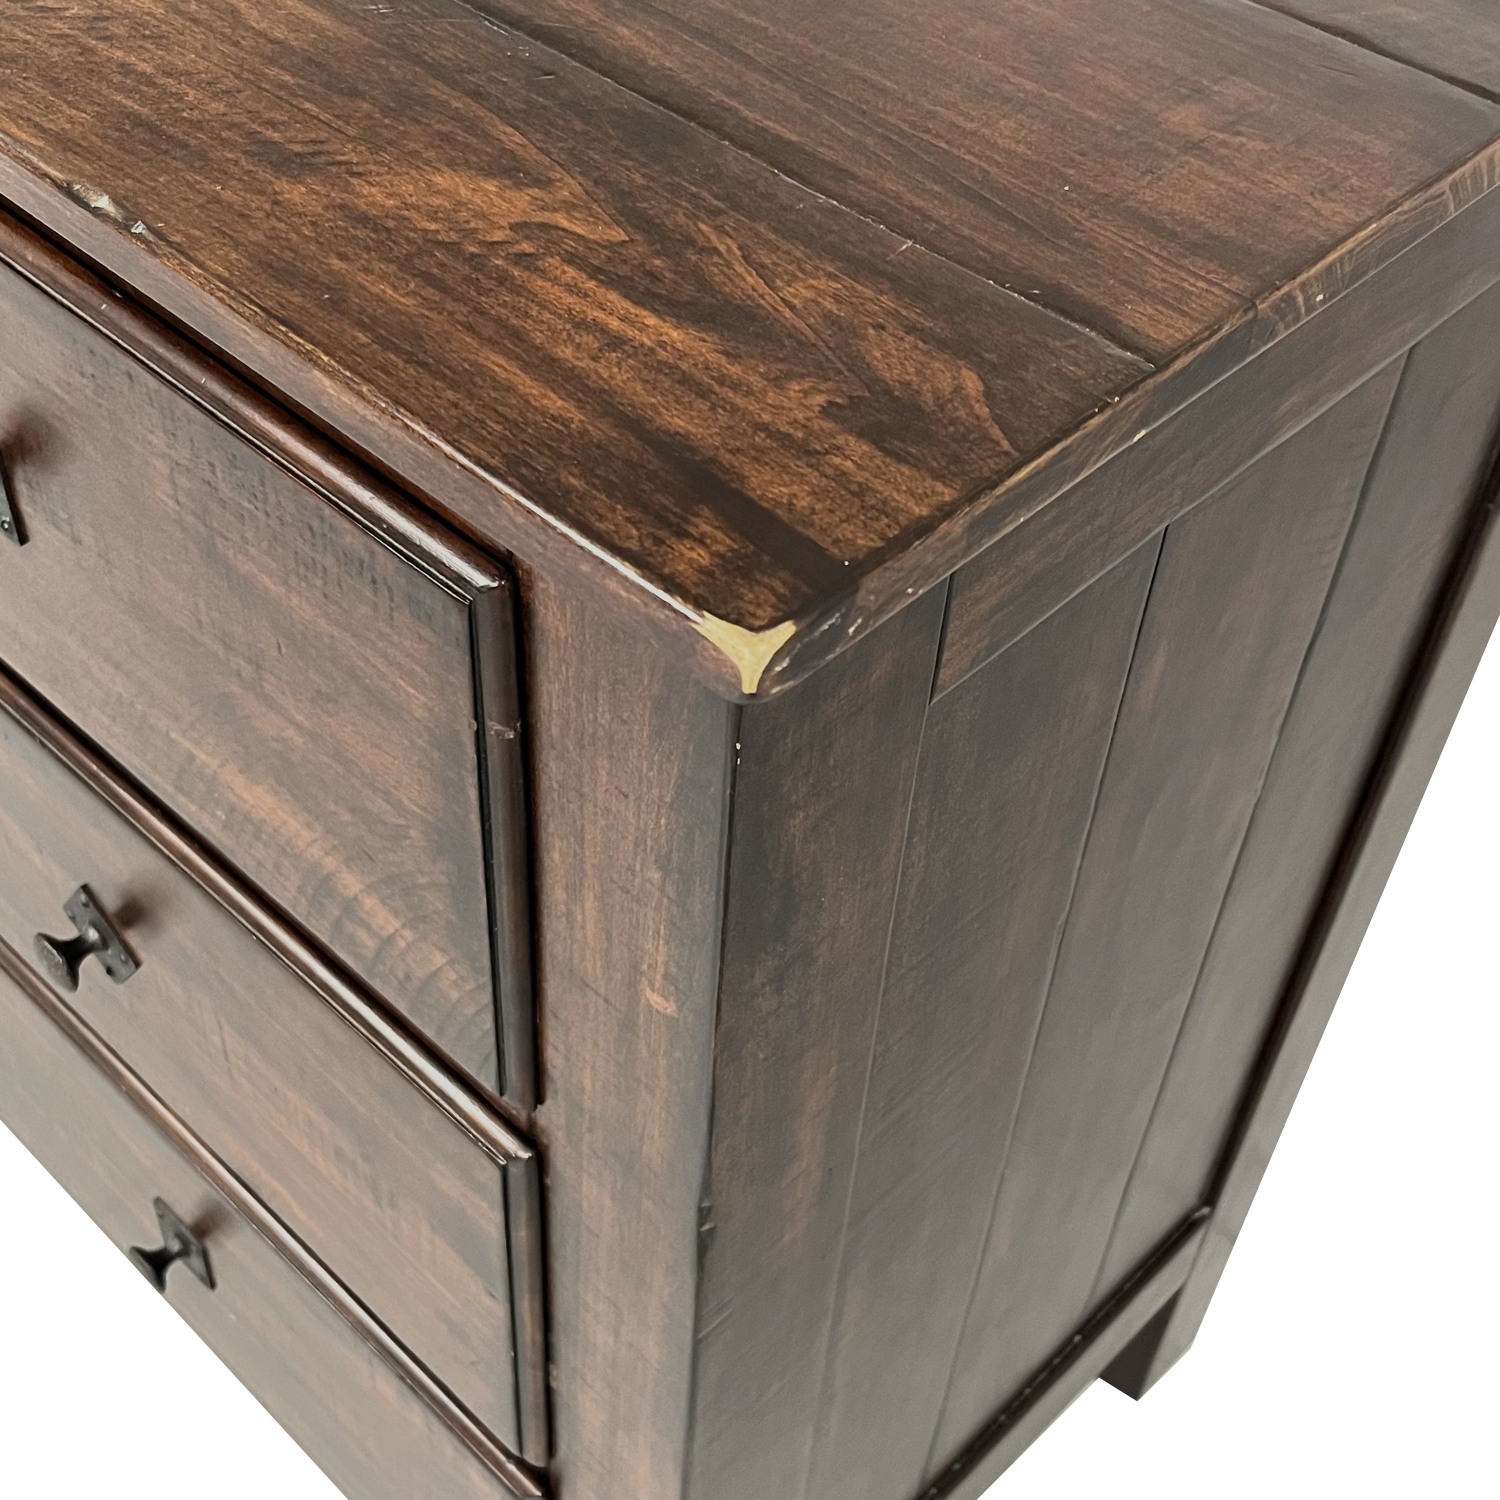 https://res.cloudinary.com/dkqtxtobb/image/upload/f_auto,q_auto:best,w_1500/product-assets/460942/pottery-barn/storage/dressers/pottery-barn-mason-rustic-four-drawer-dresser-coupon.jpeg